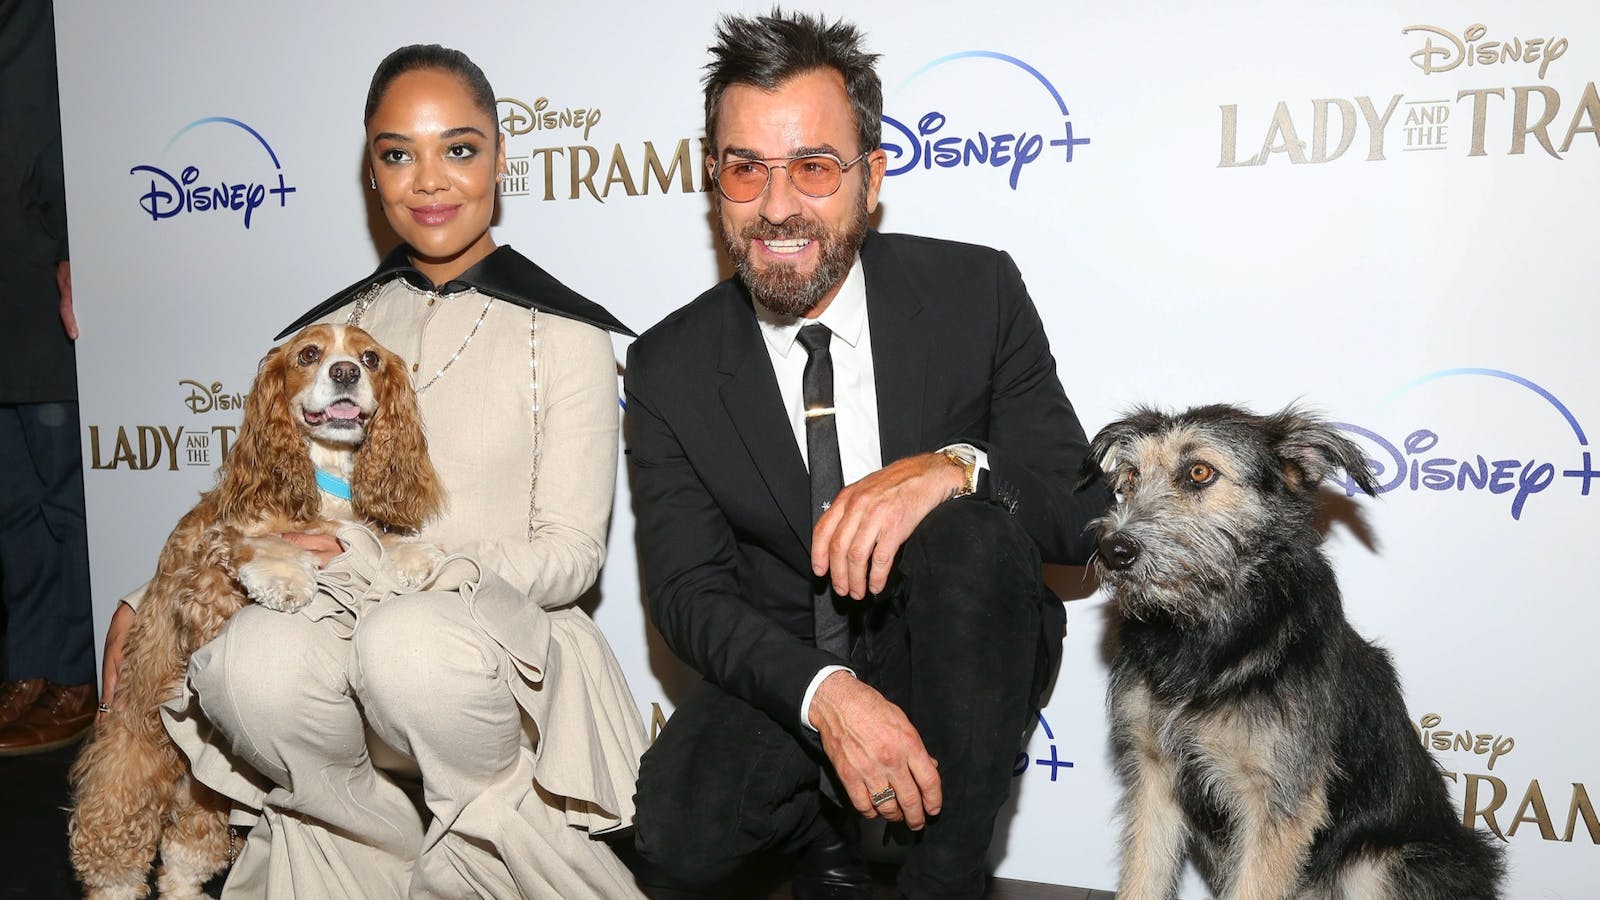 Cast Members of "Lady and the Tramp." Photo by AP.